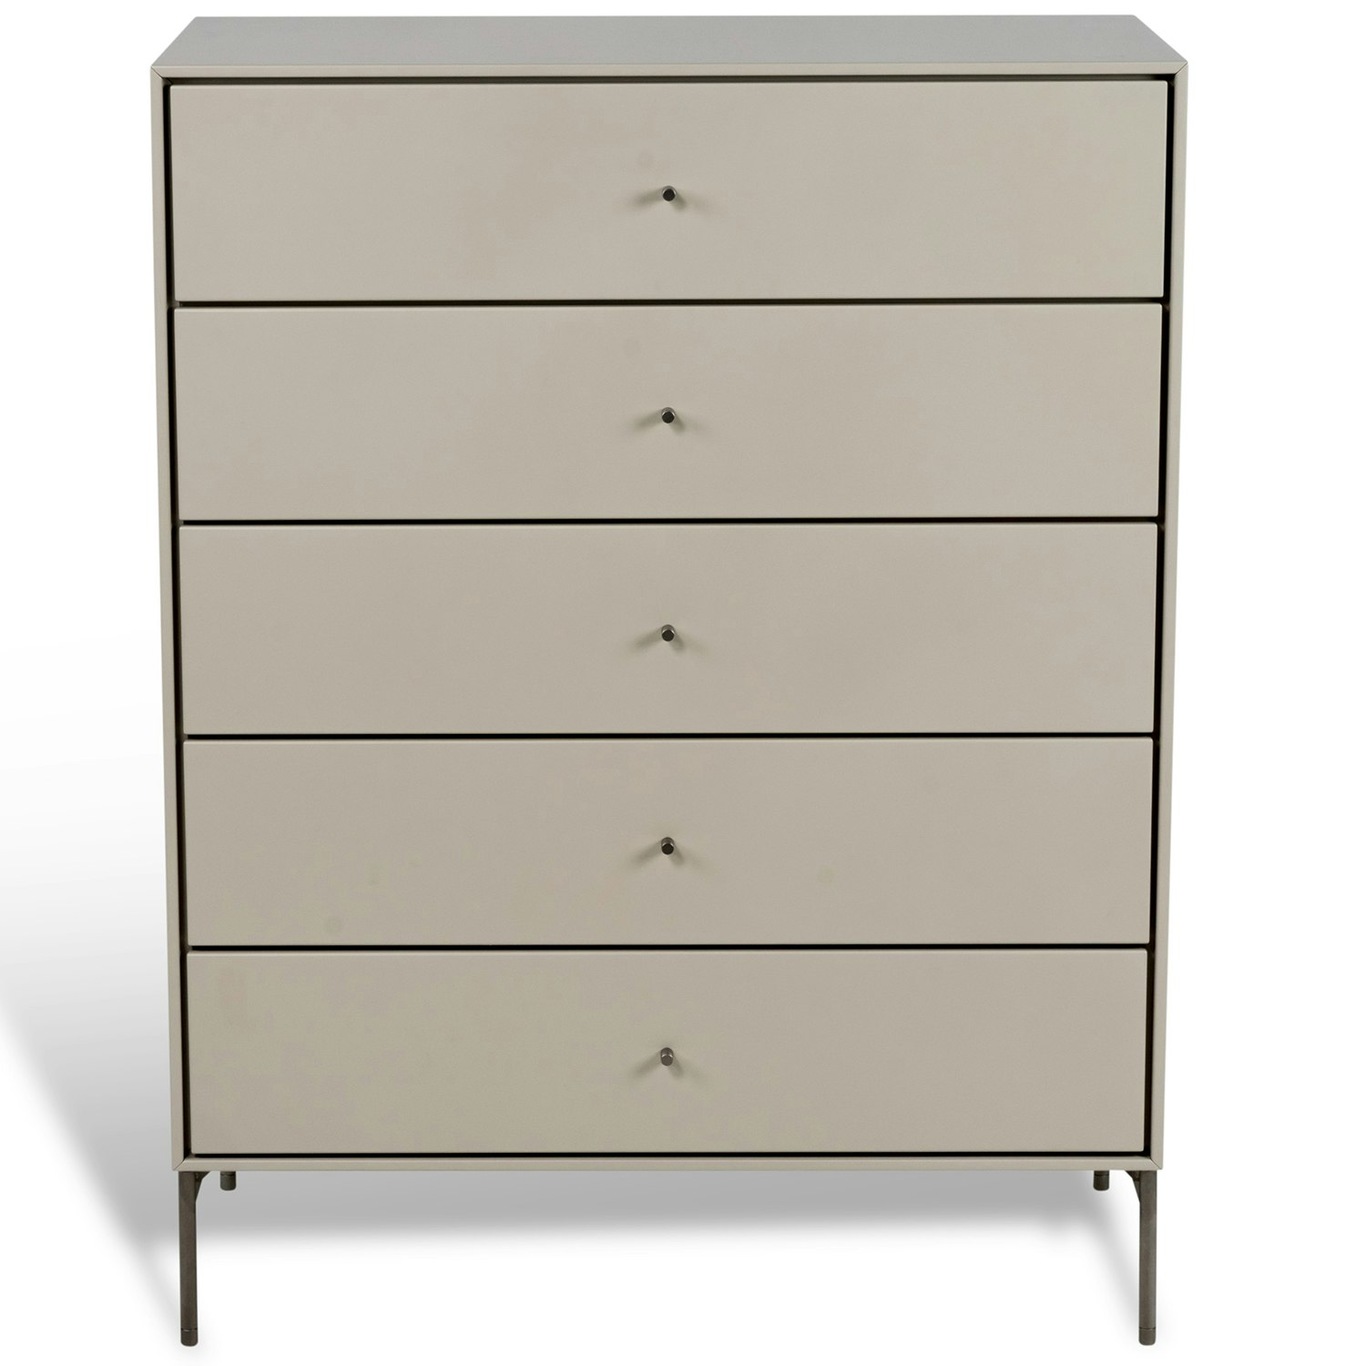 Volt Chest Of Drawers With 5 Drawers, Beige/Stainless Steel